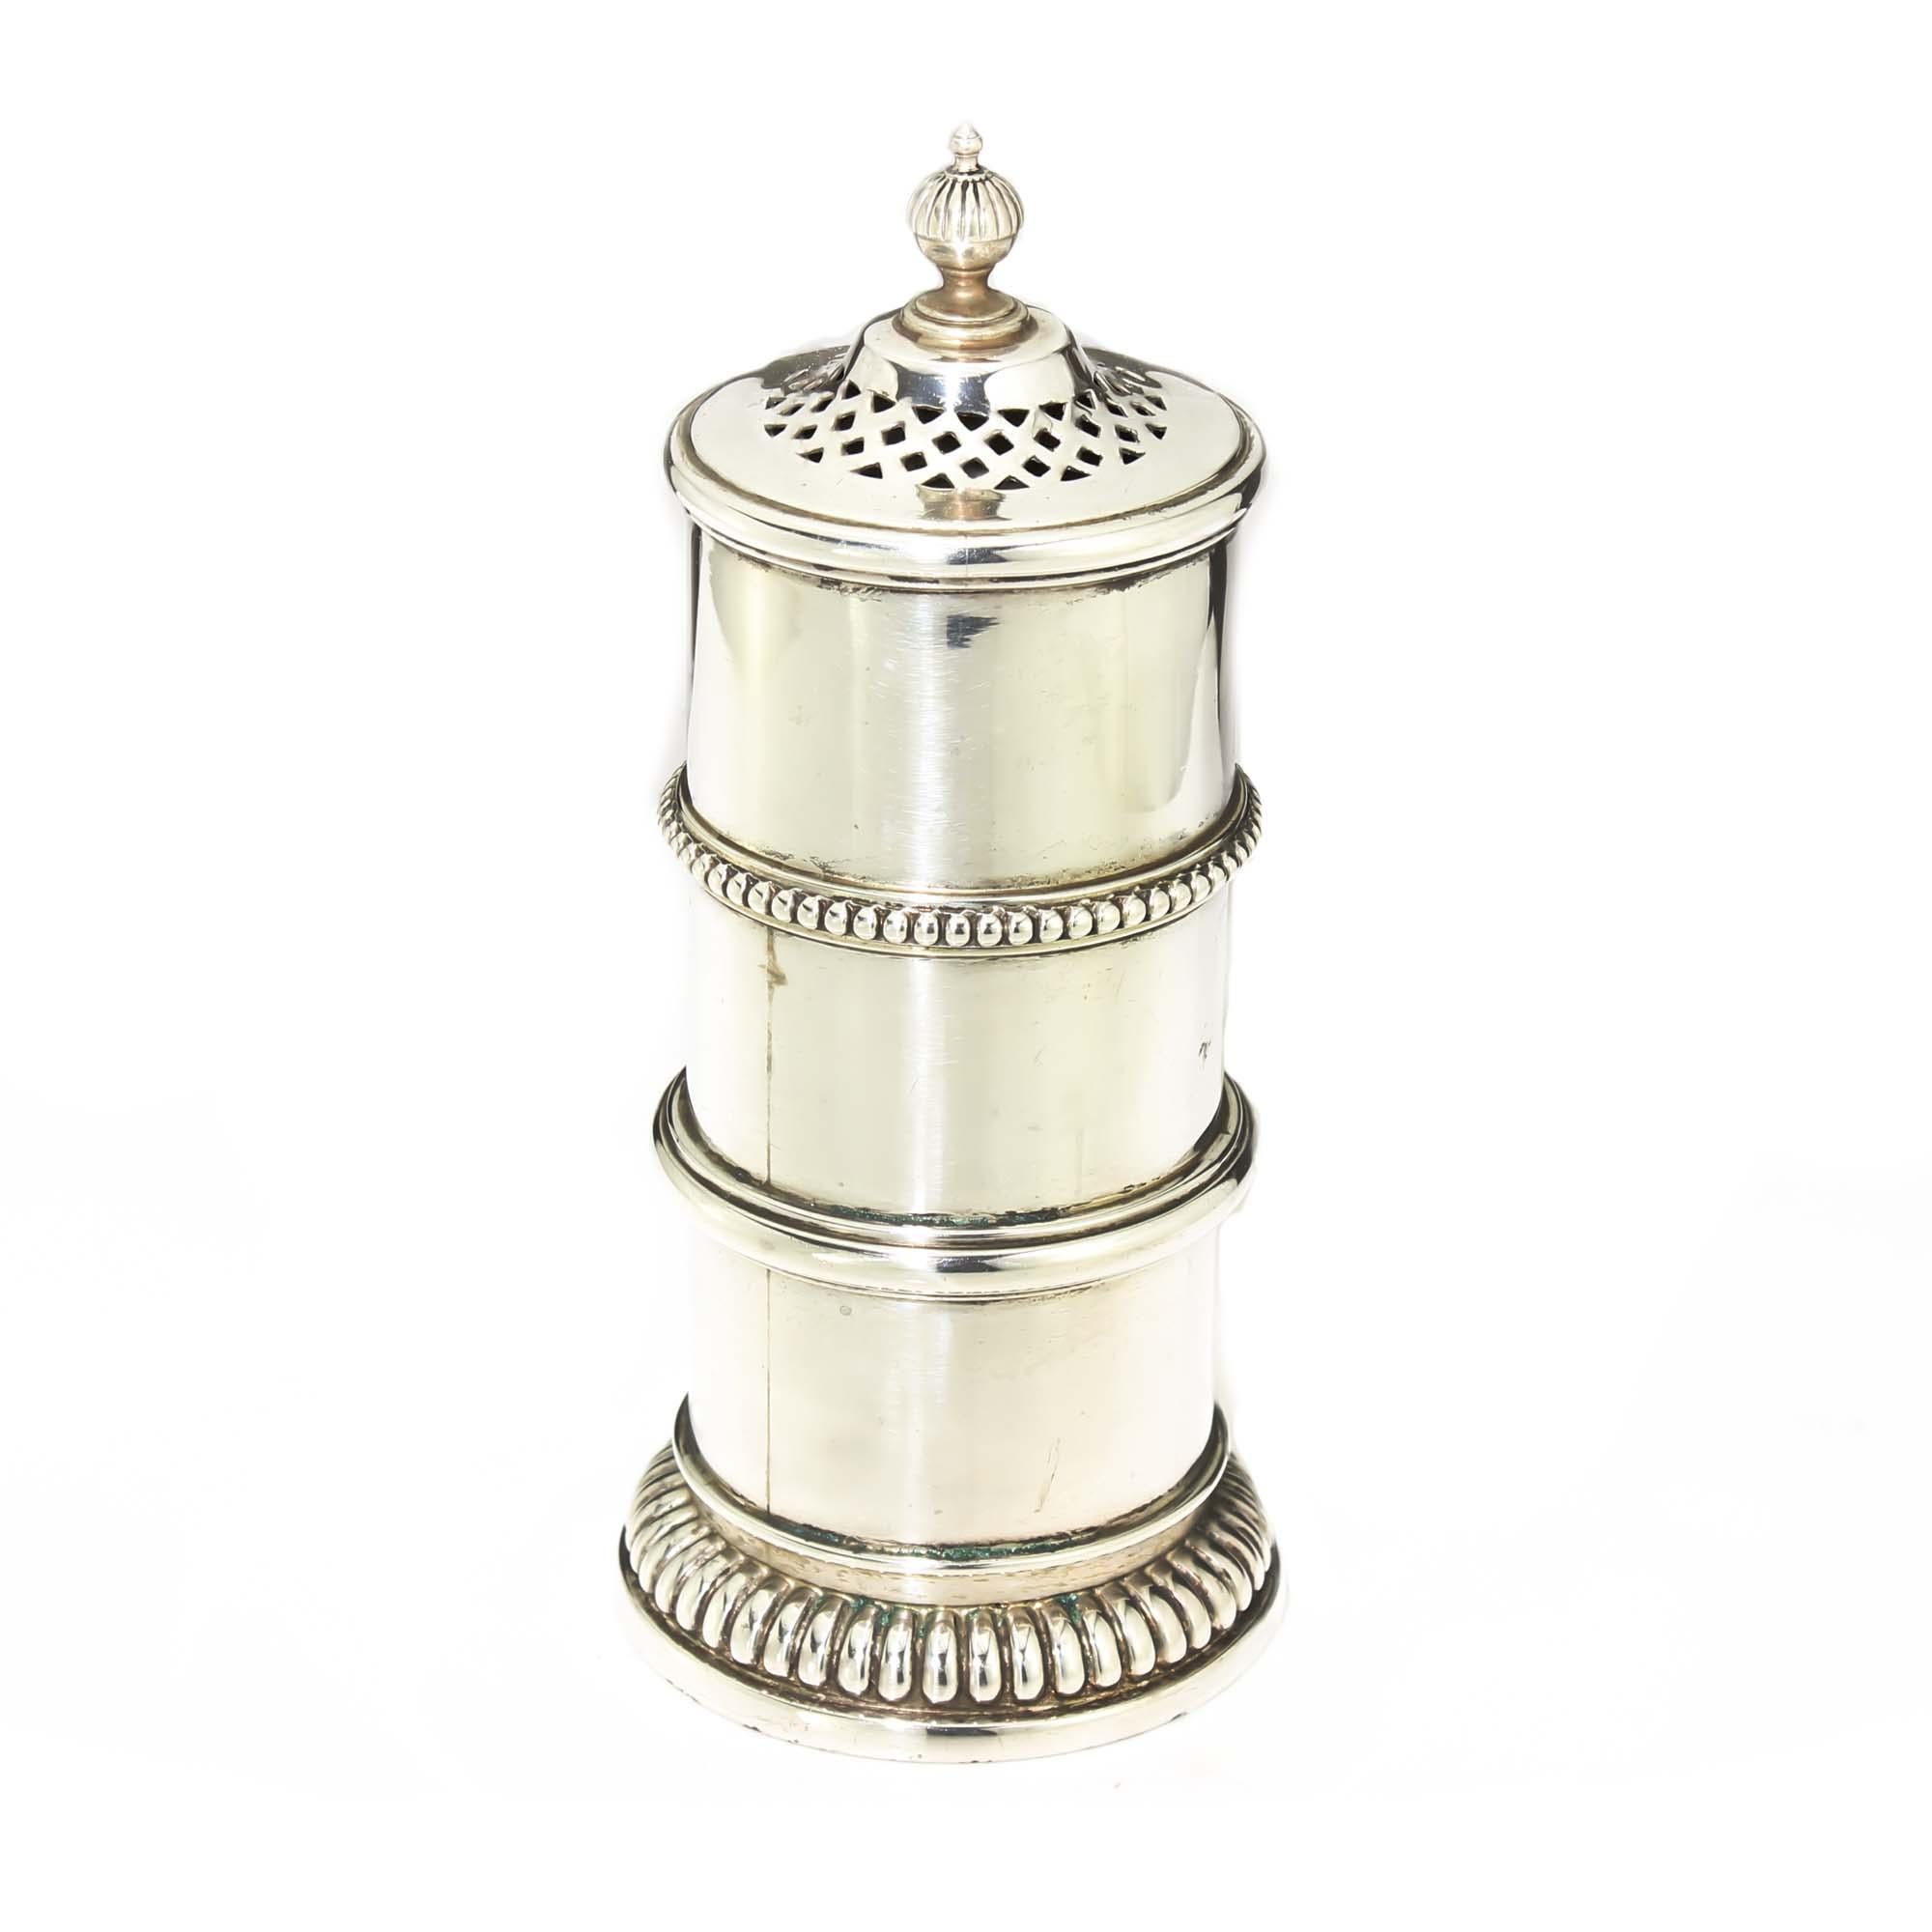 Sterling silver Art Deco sugar caster
Maker: James Dixon & Sons 
Made in England, Sheffield, 1926
Fully hallmarked.

Dimensions - 
Diameter x height: 6.8 x 15.5 cm 
Weight : 266 grams total

Condition: Minor wear from general usage, minor